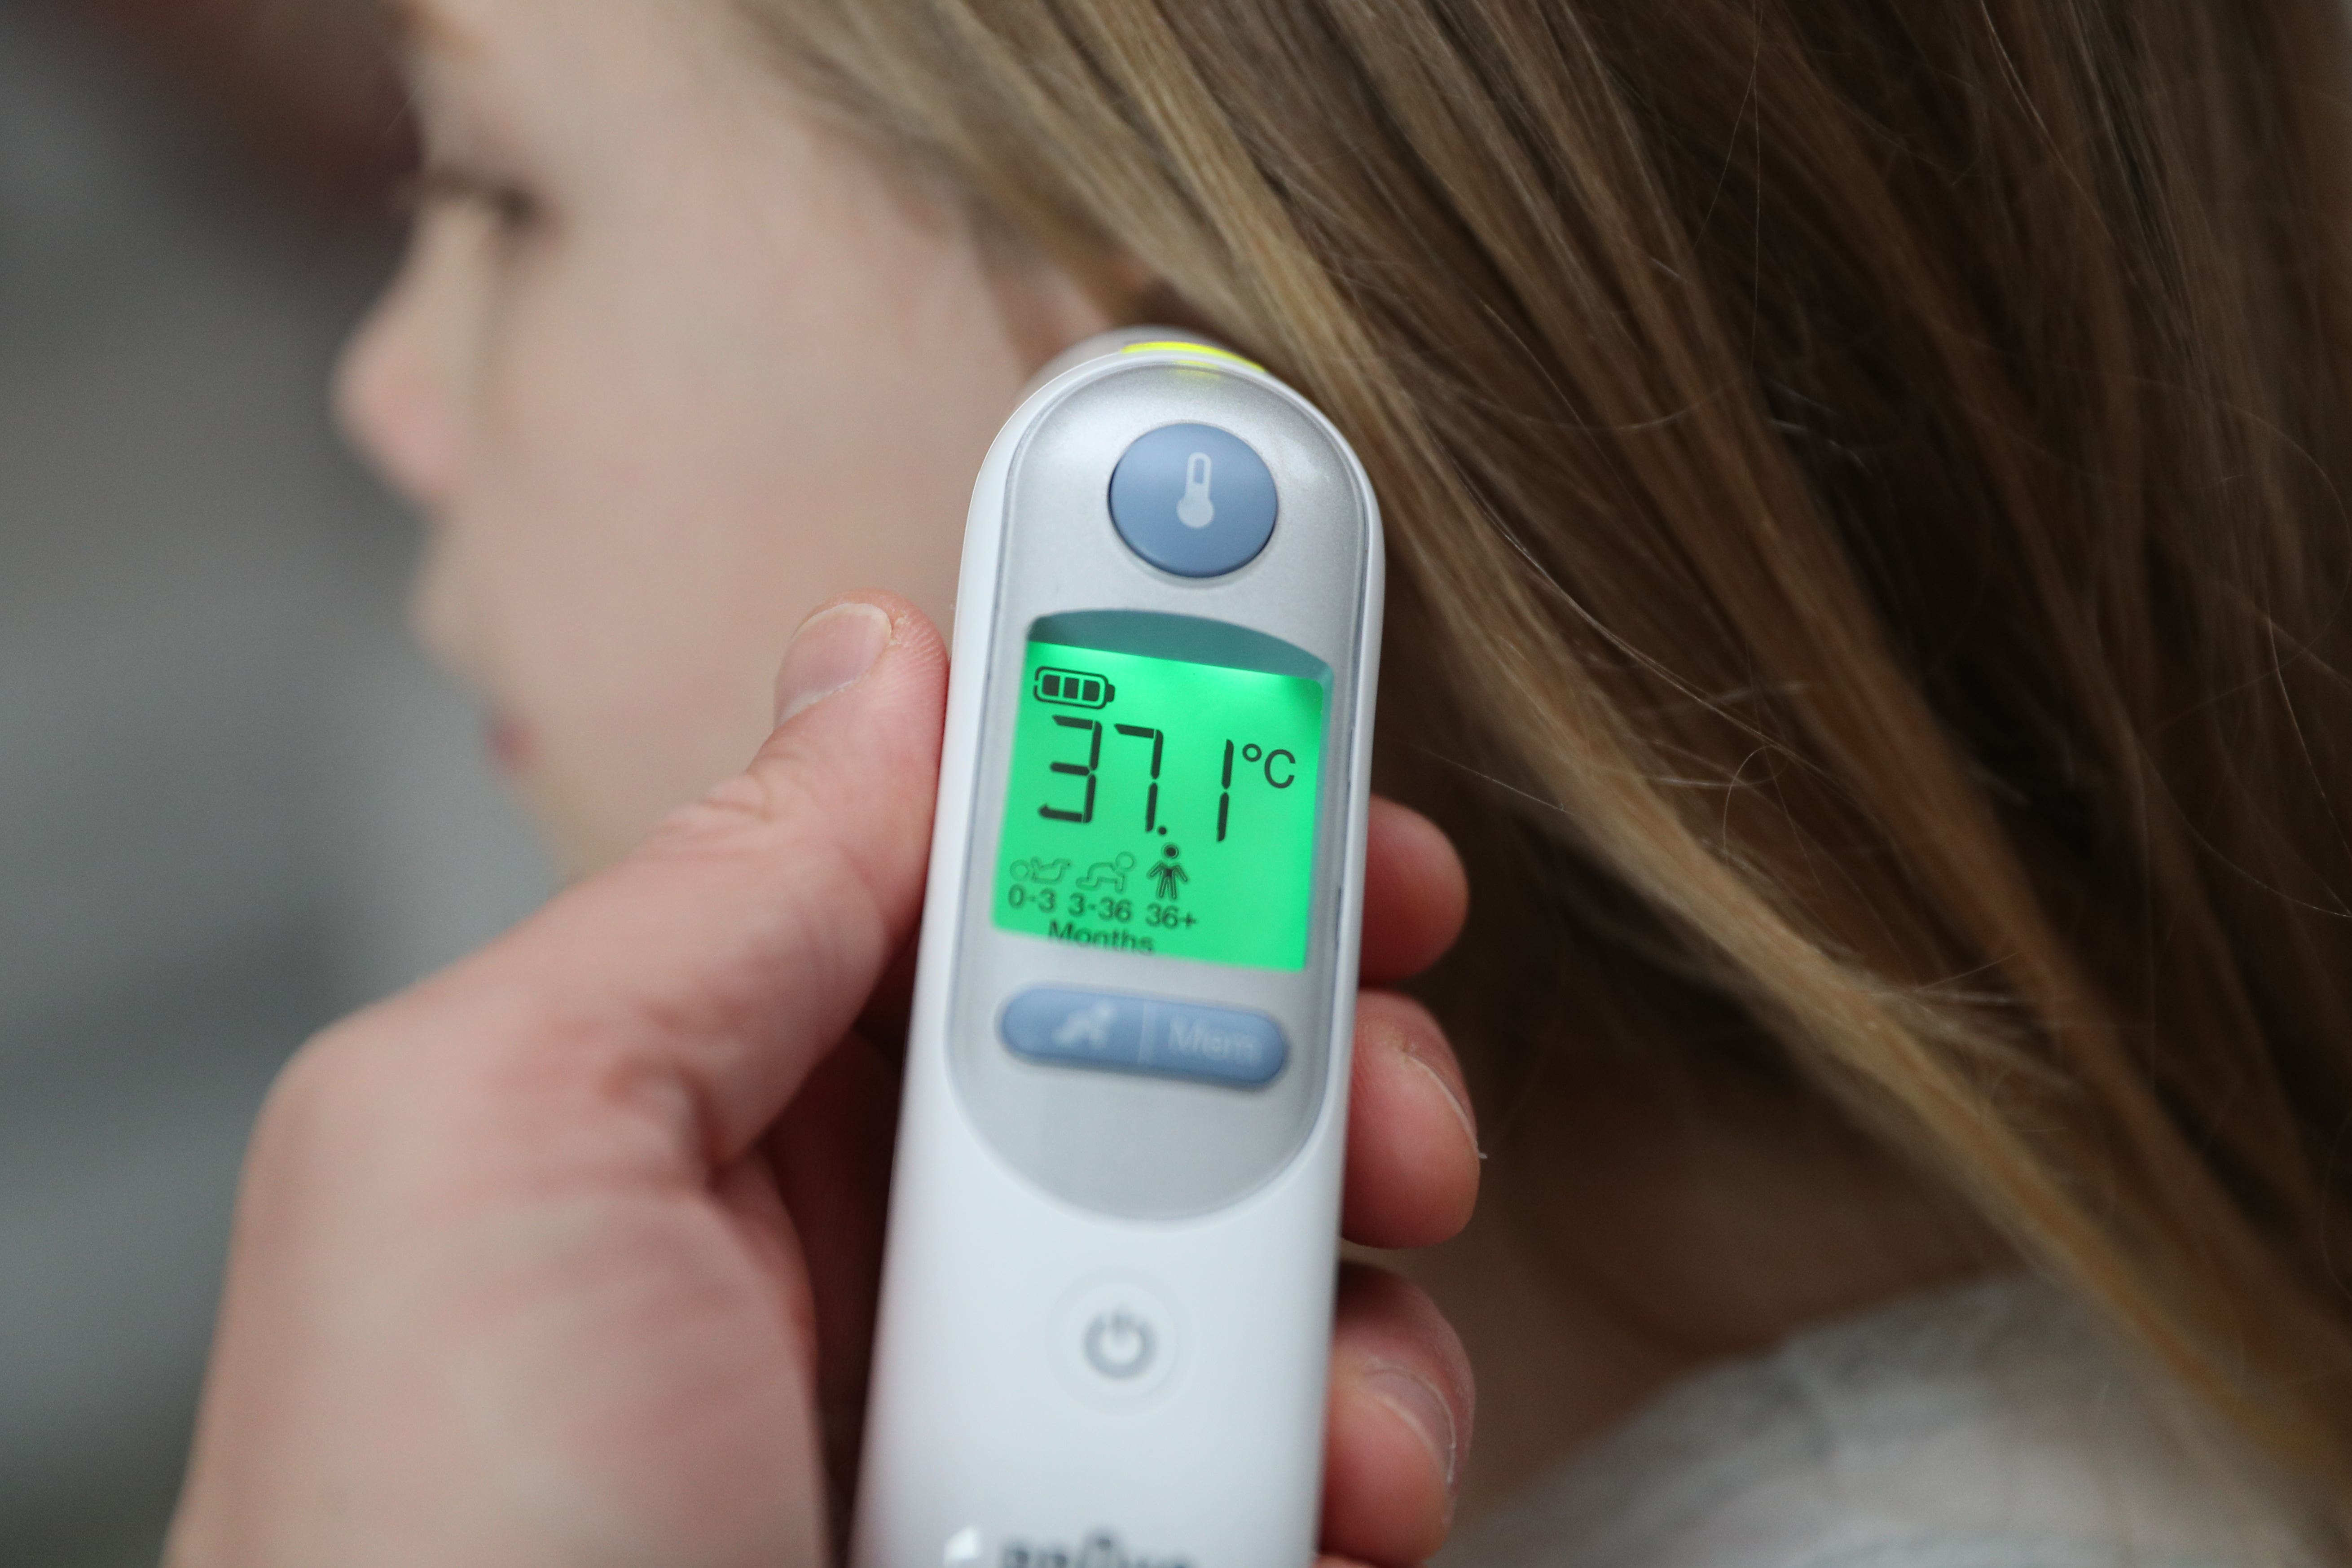 A high temperature (38C and above) can be a sign of Strep A infection